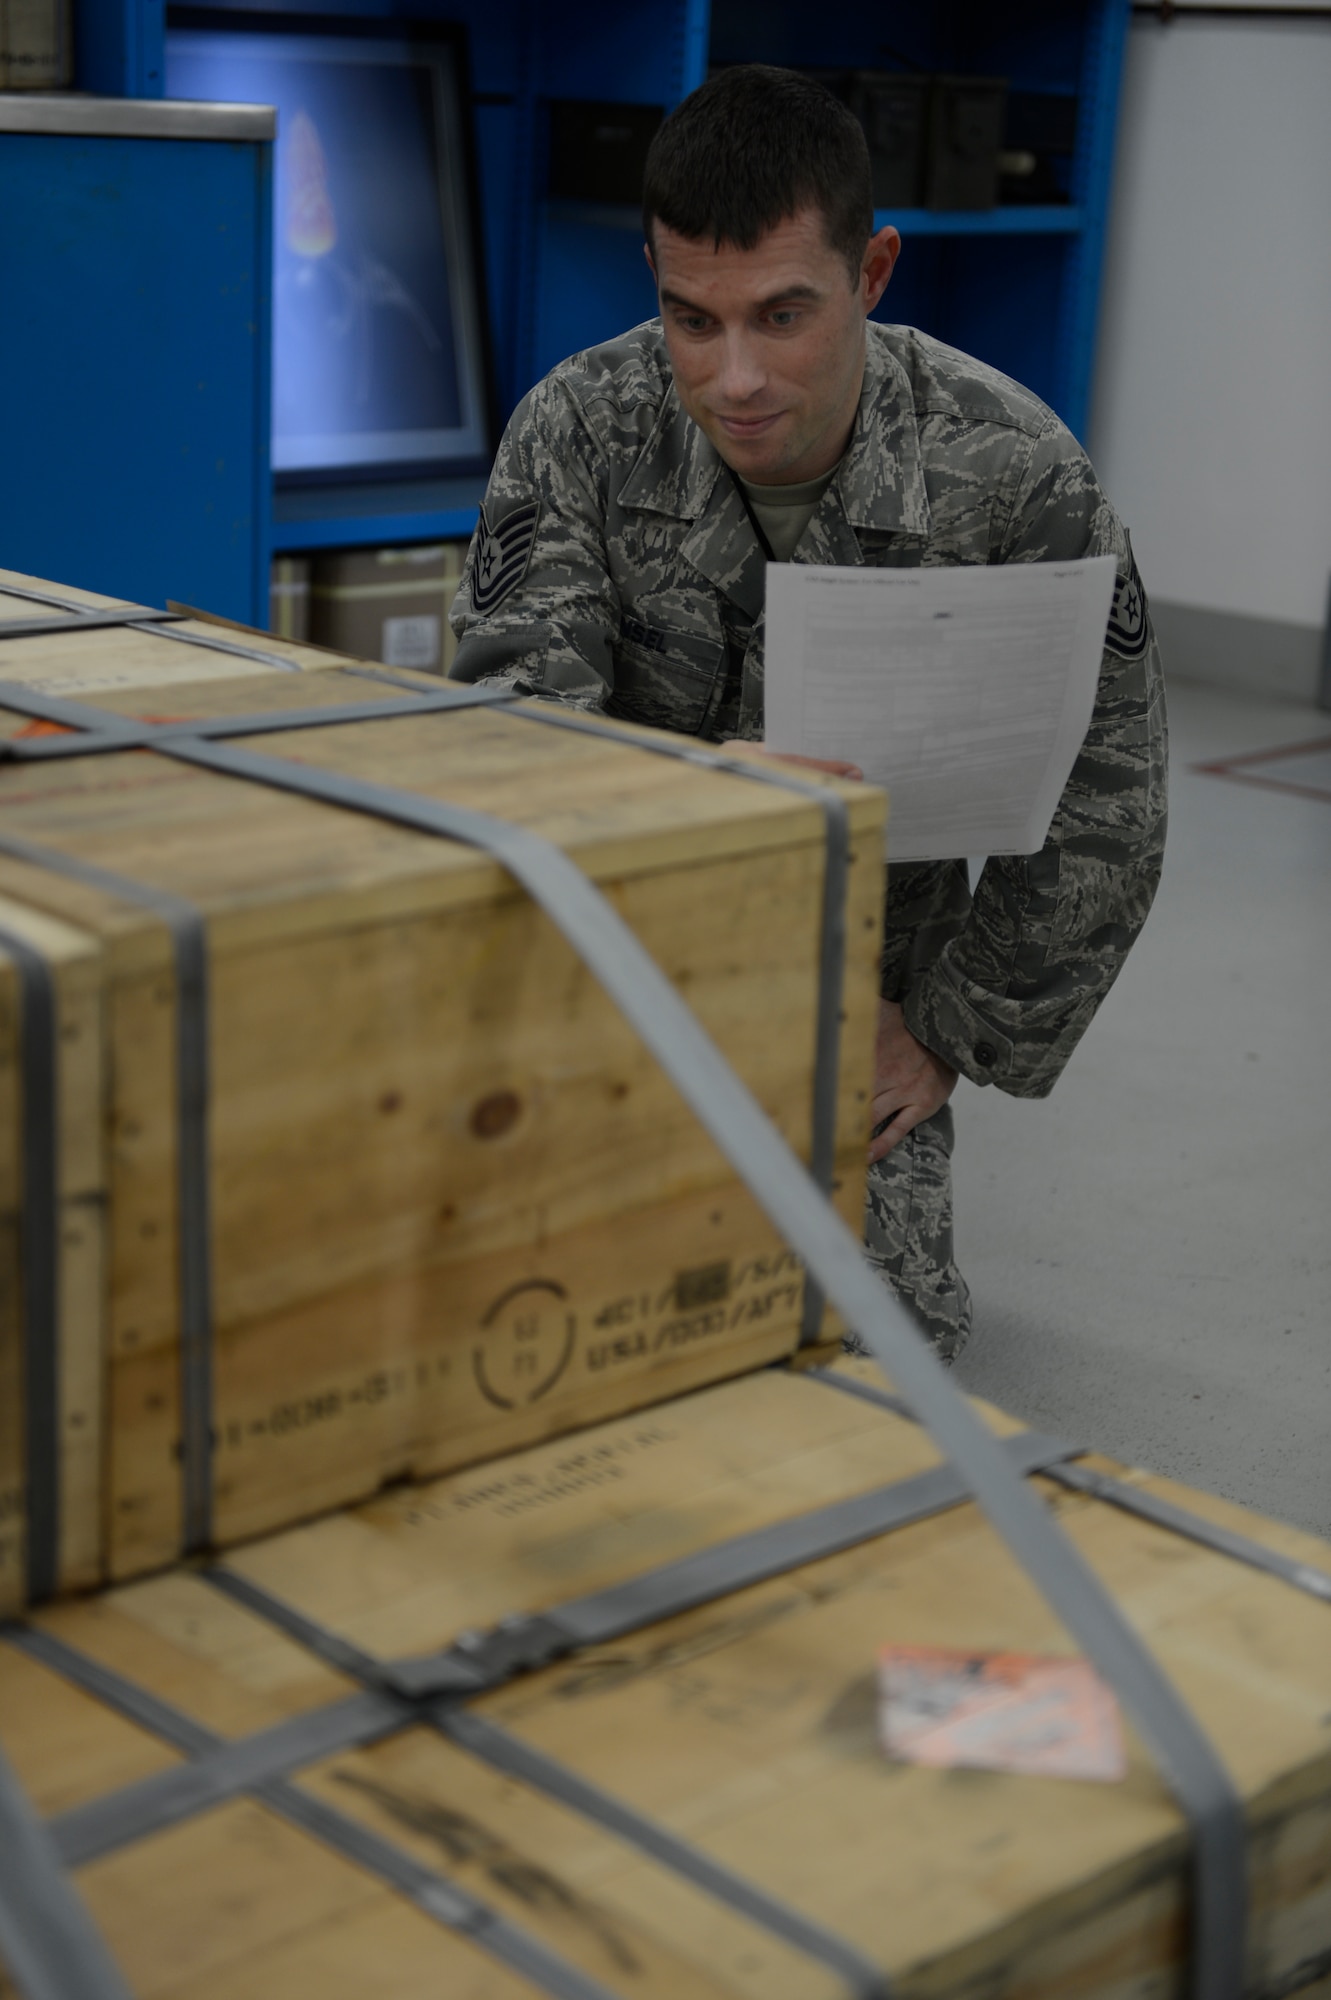 U.S. Air Force Tech. Sgt. Nathan Ansel, 52nd Equipment Maintenance Squadron senior munitions inspector from Ephrata, Pa., inspects crates of aircraft counter measure flares Feb. 26, 2014 on Spangdahlem Air Base, Germany. Munitions are inspected to insure that they are serviceable and ready to use on an aircraft. (U.S. Air Force photo by Staff Sgt. Christopher Ruano/Released)